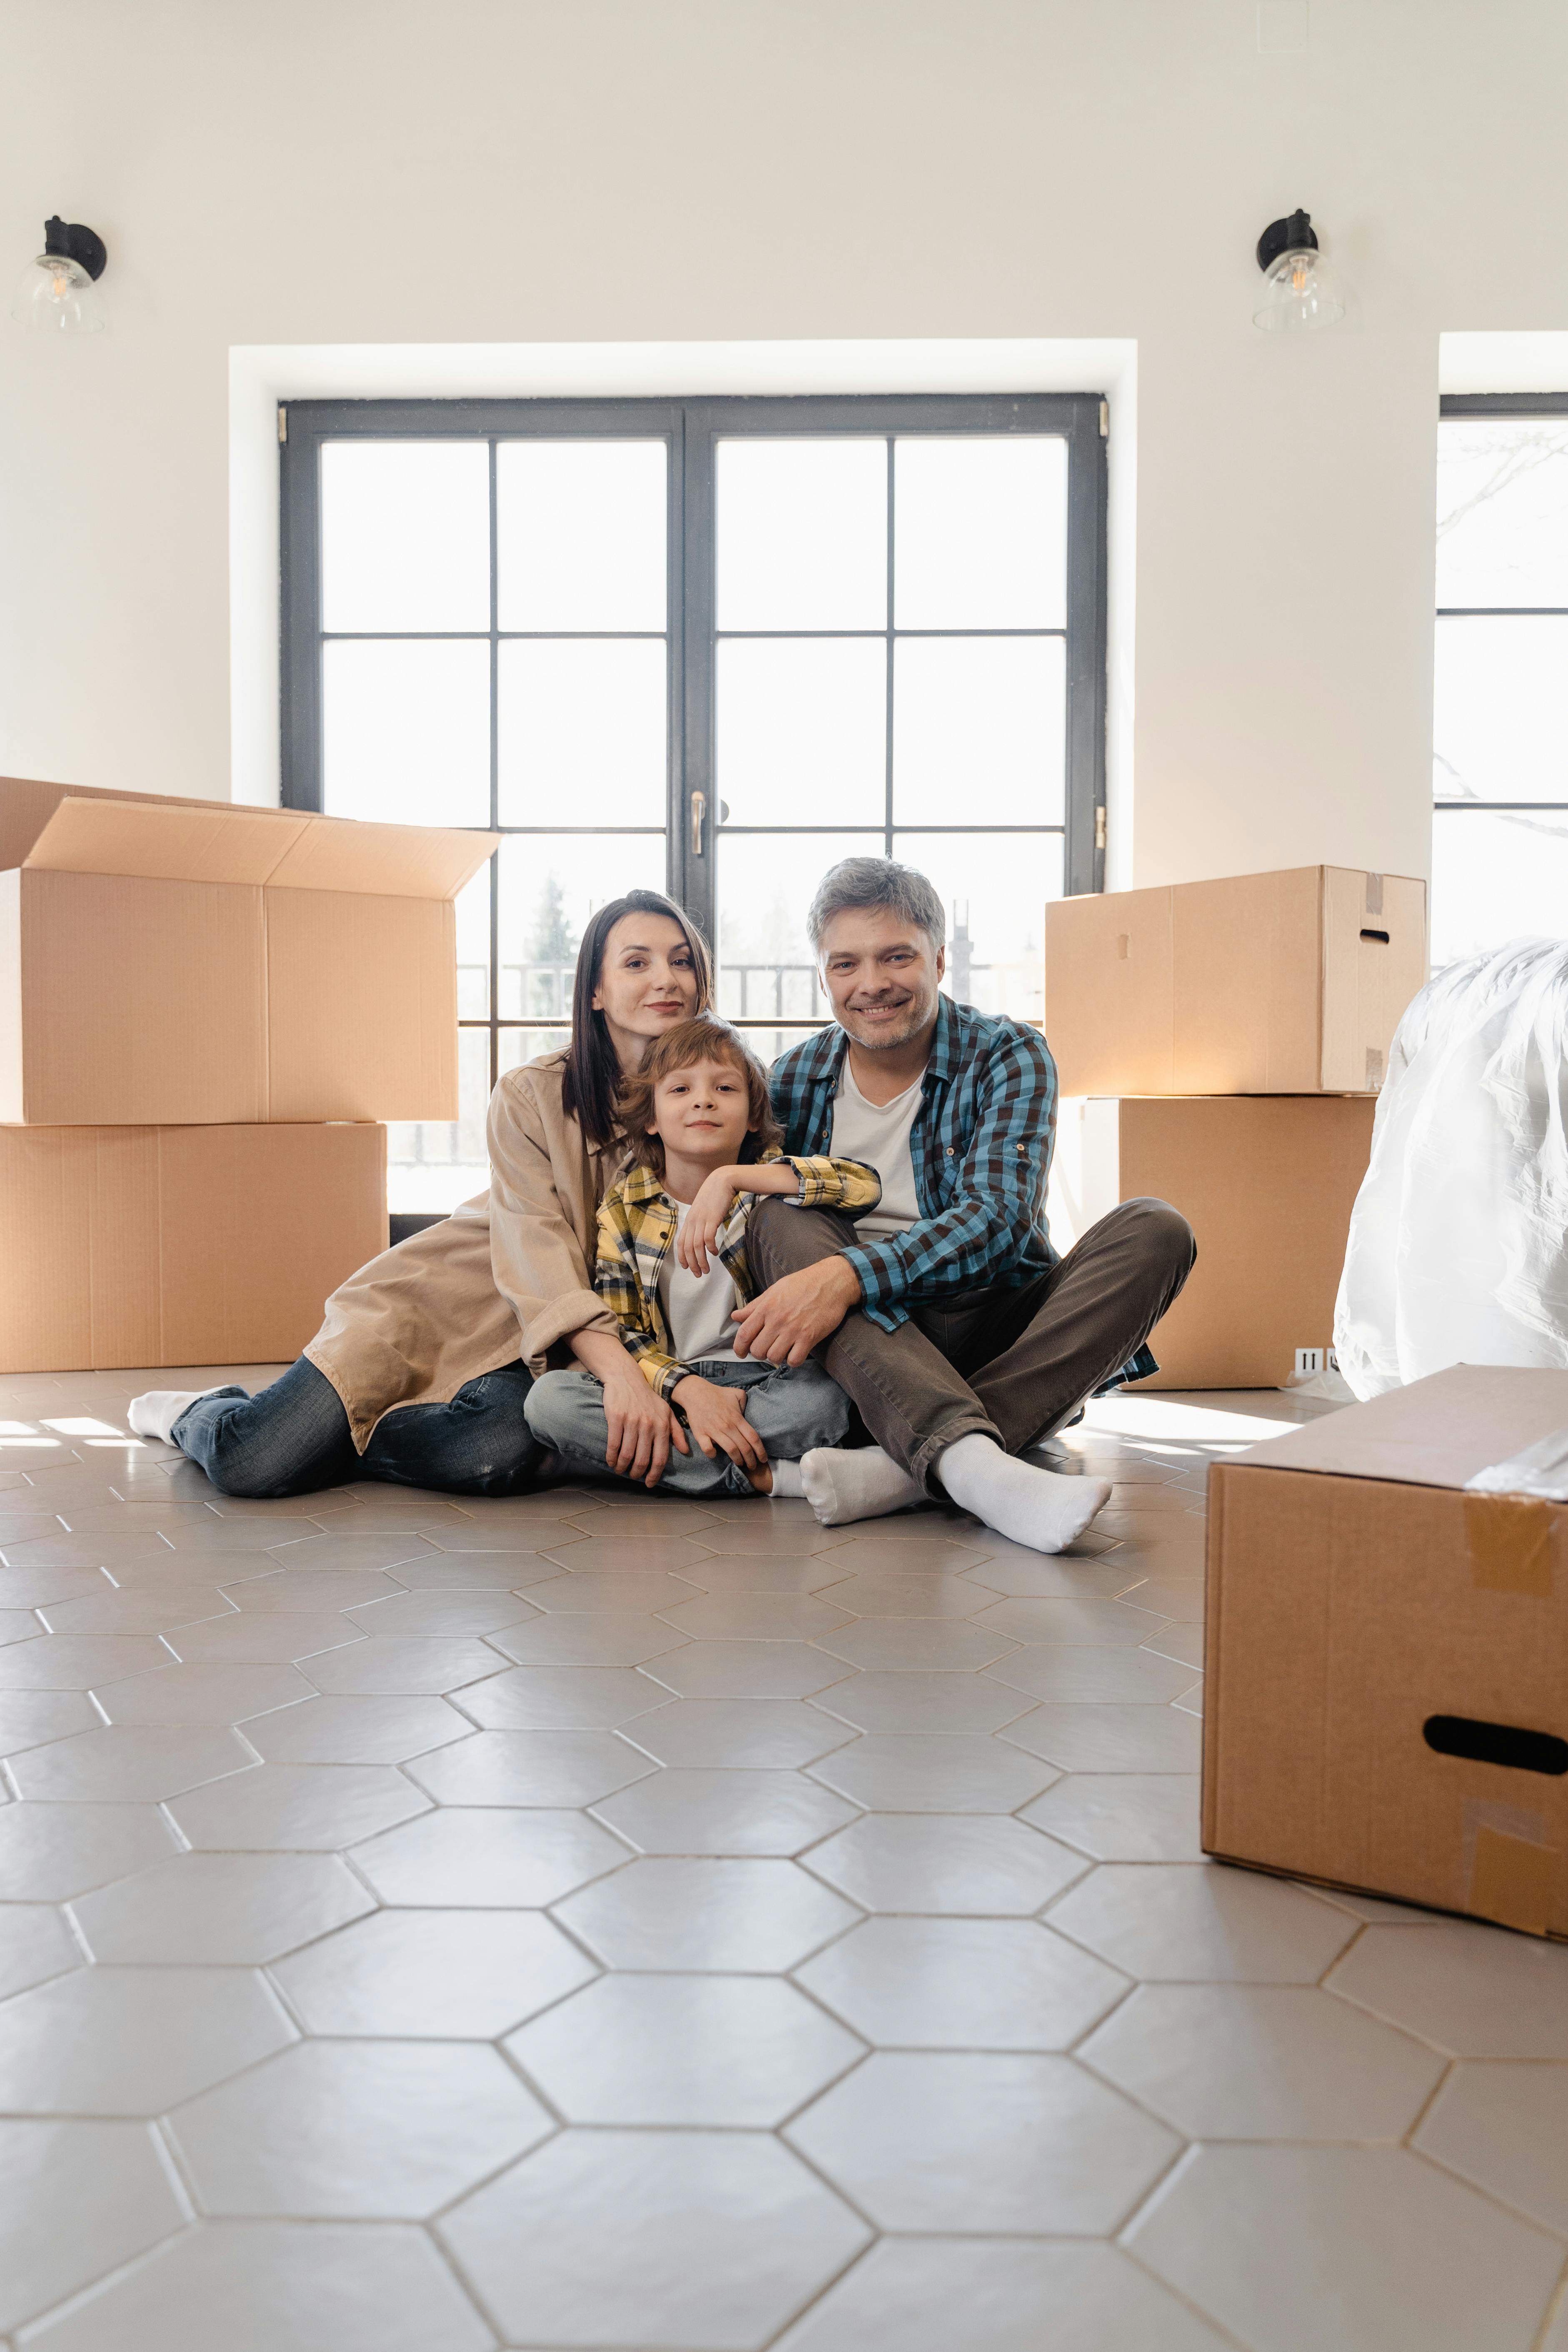 A family of three sitting on the living room floor with boxes around them | Source: Pexels